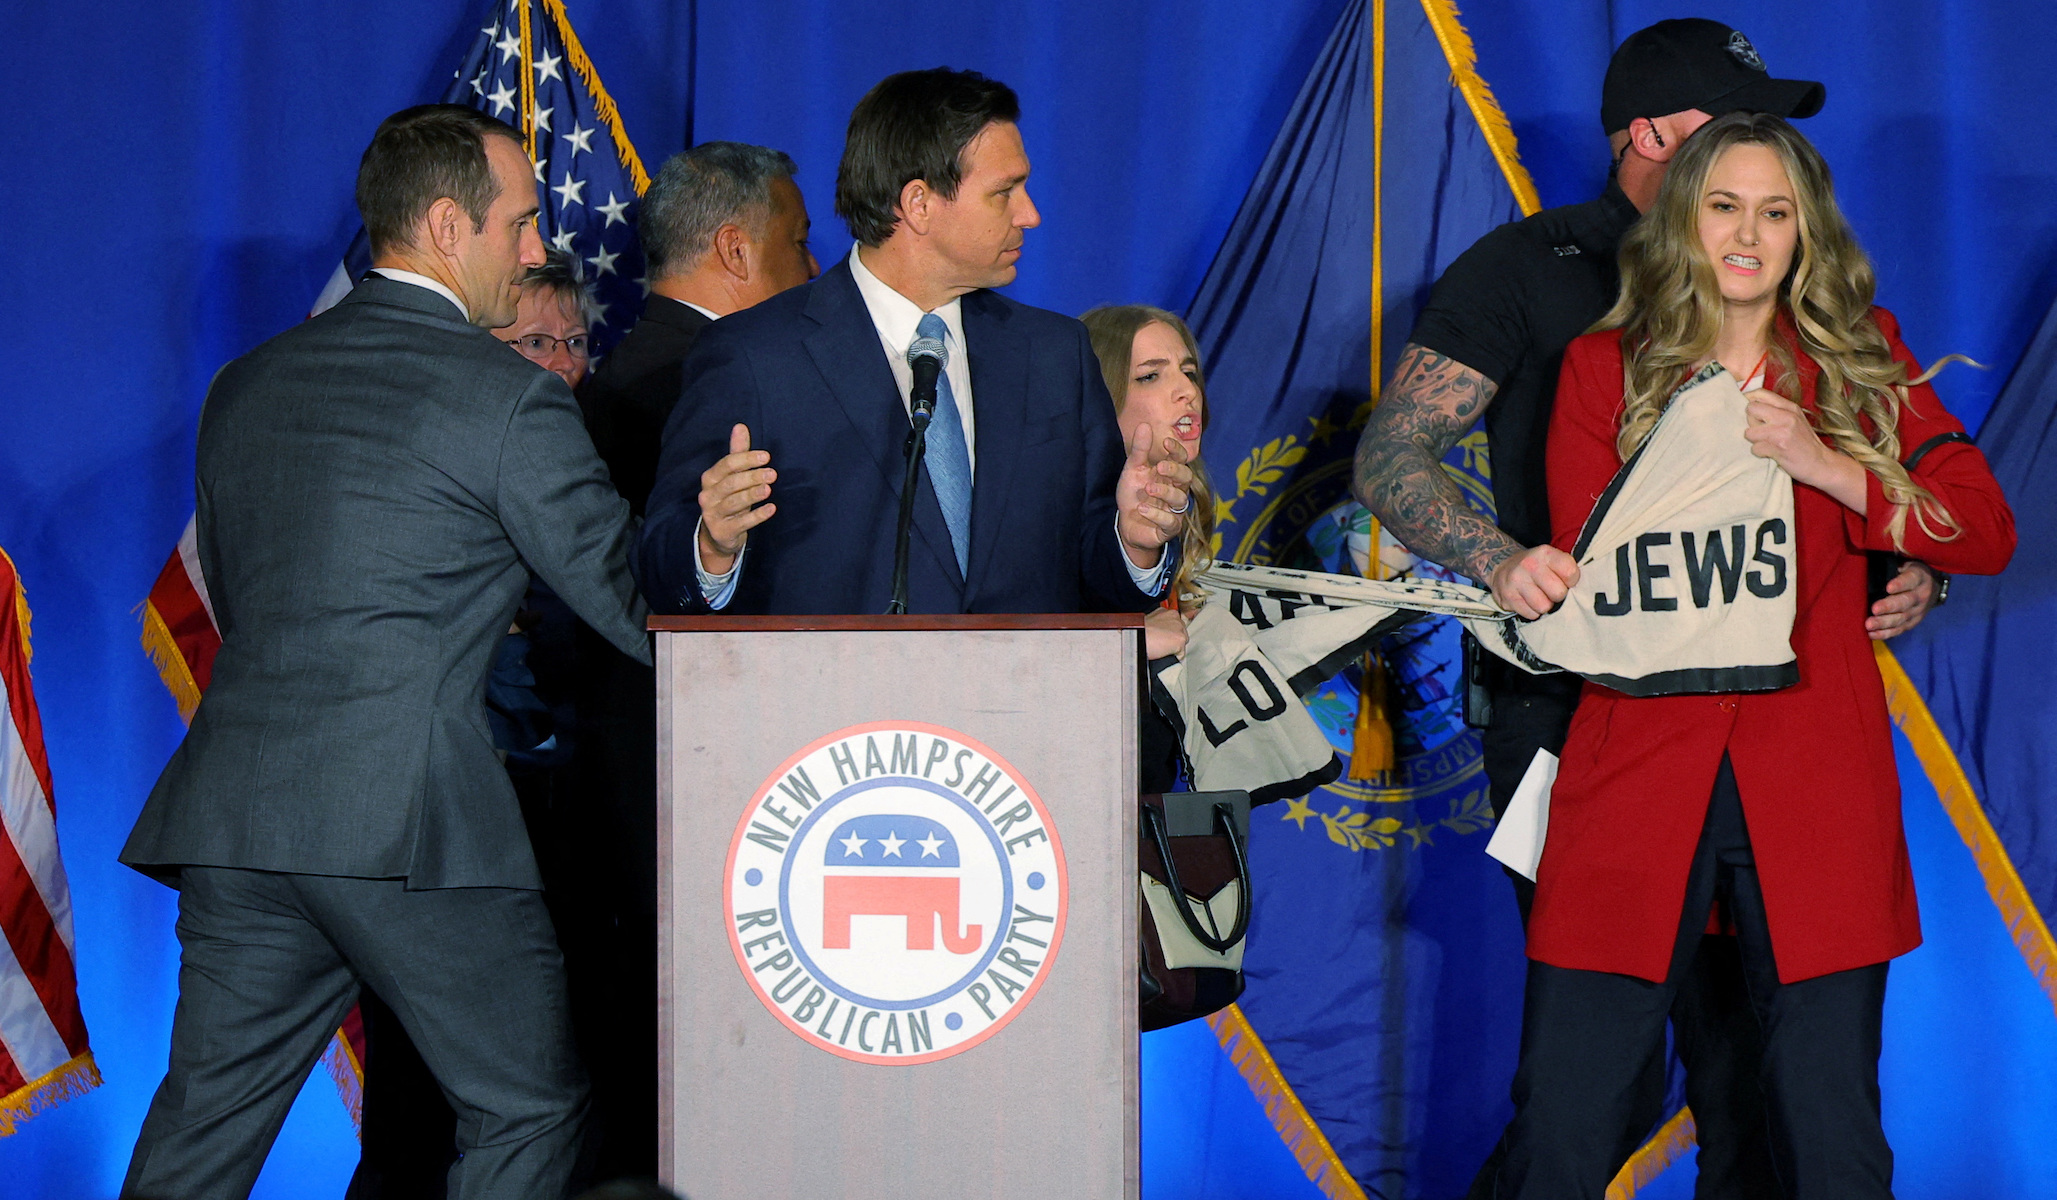 NextImg:Far-Left American Jewish Group Storms Stage During DeSantis Speech at N.H. Fundraiser 